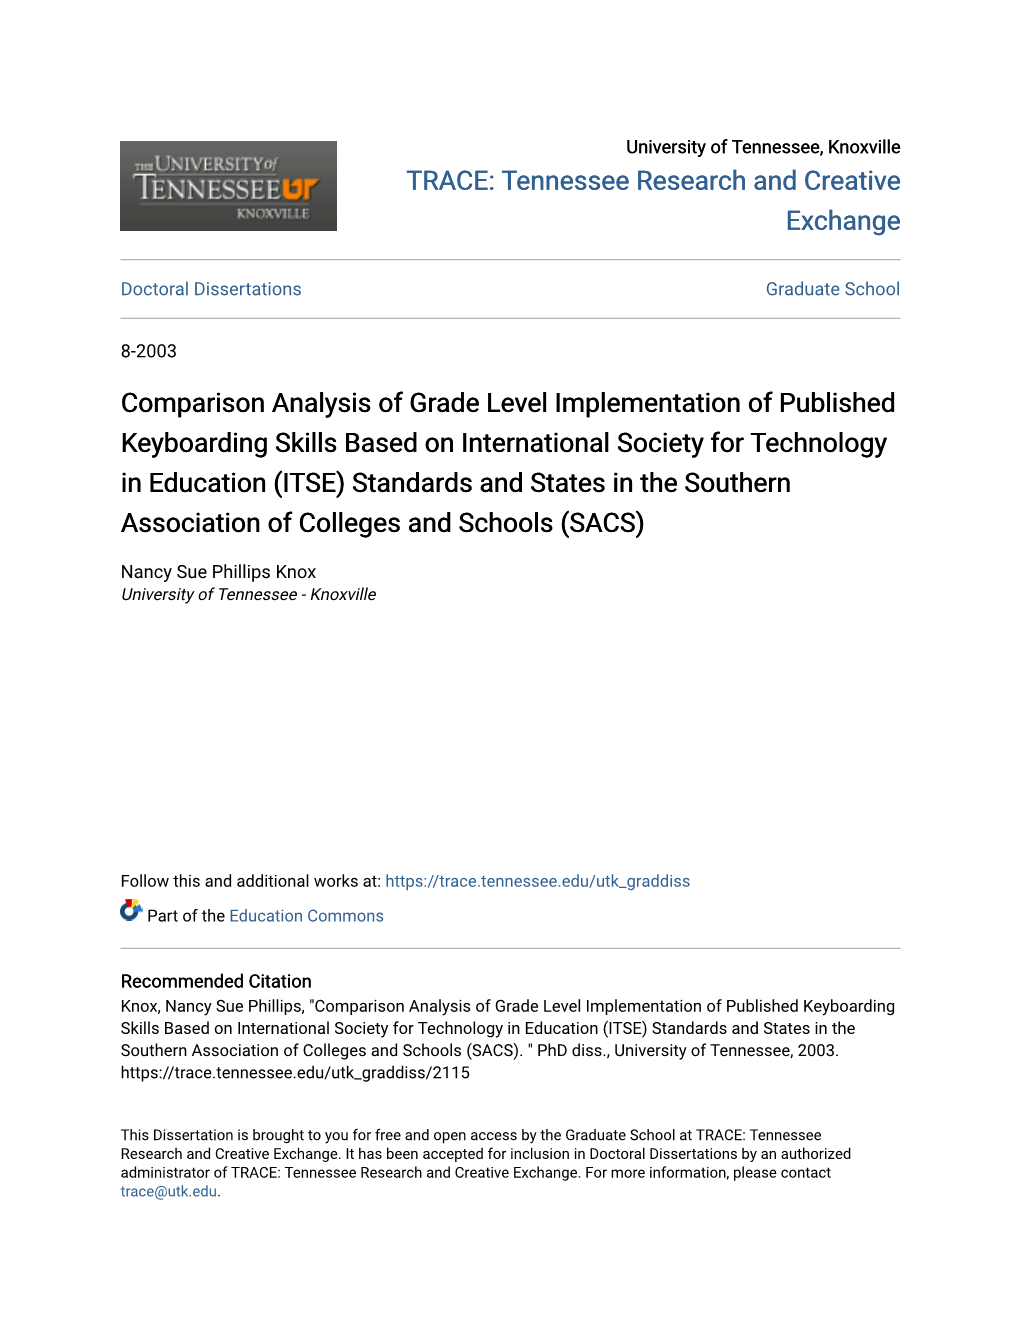 Comparison Analysis of Grade Level Implementation of Published